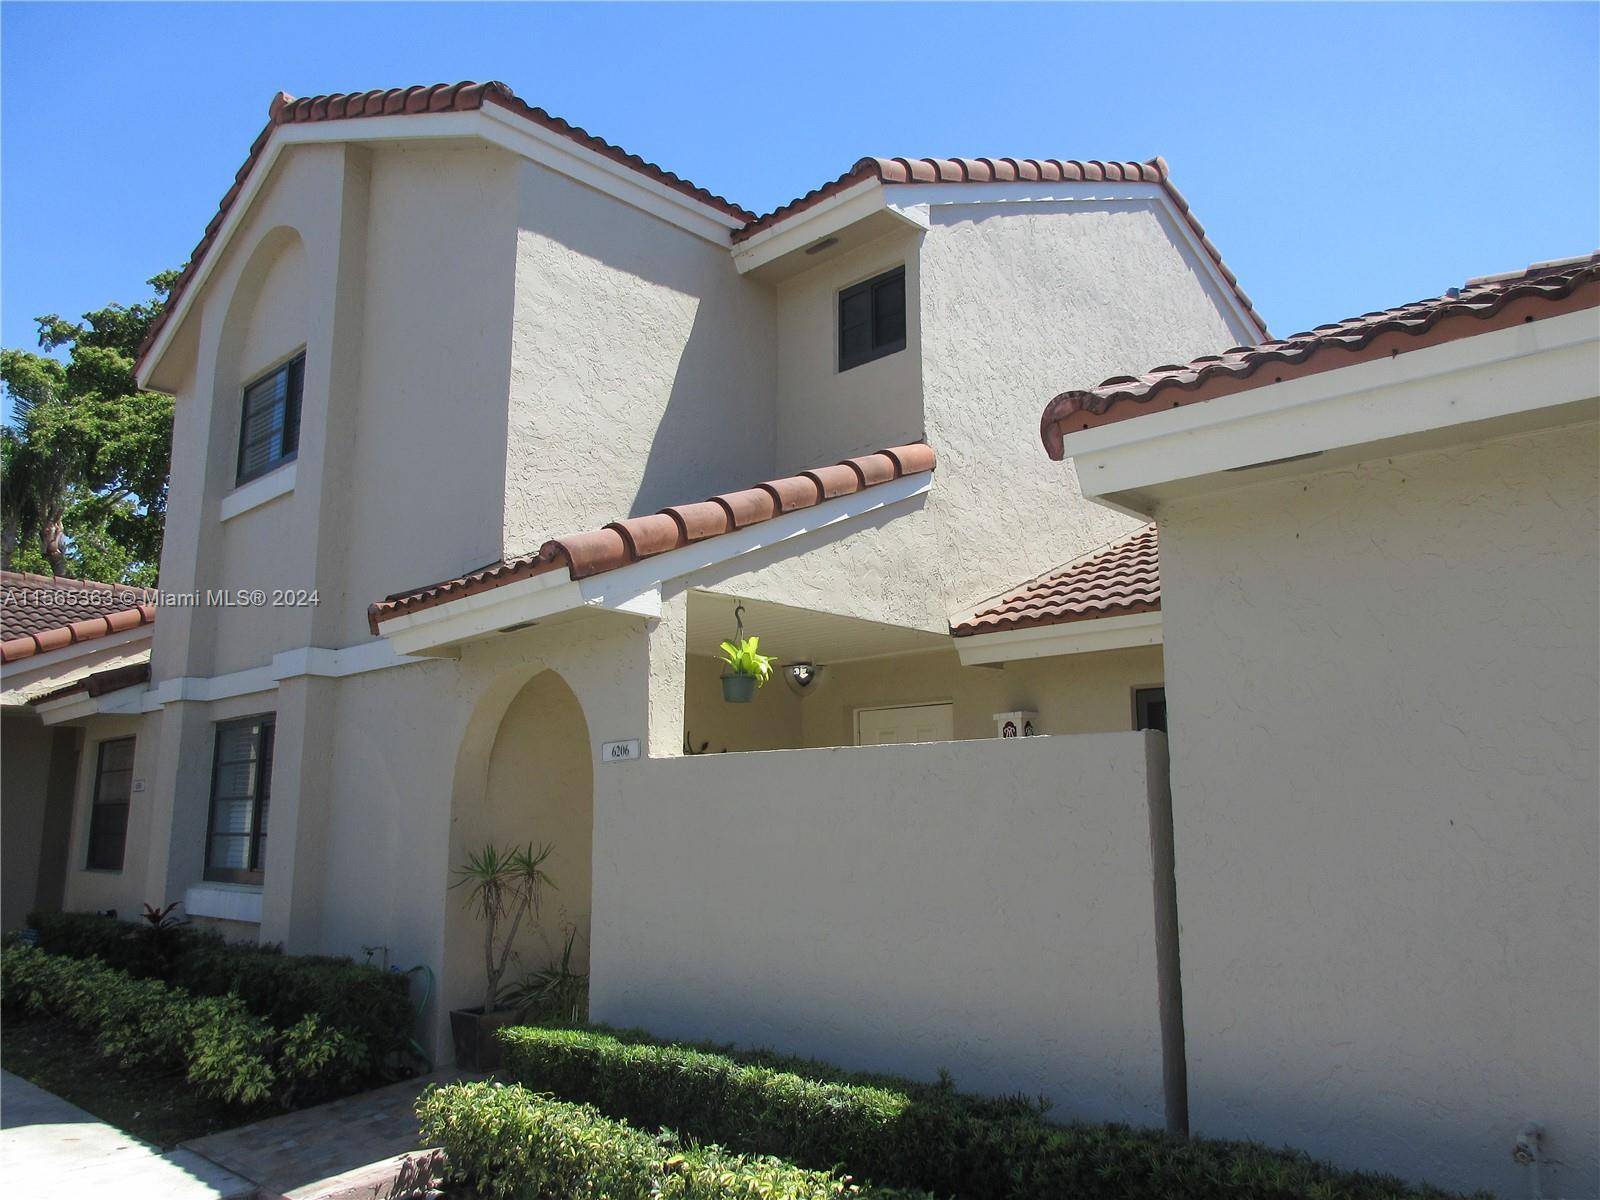 Welcome home ! This well maintained, two story townhome is located on a canal lot in The Moors, a gated community just north of Miami Lakes.